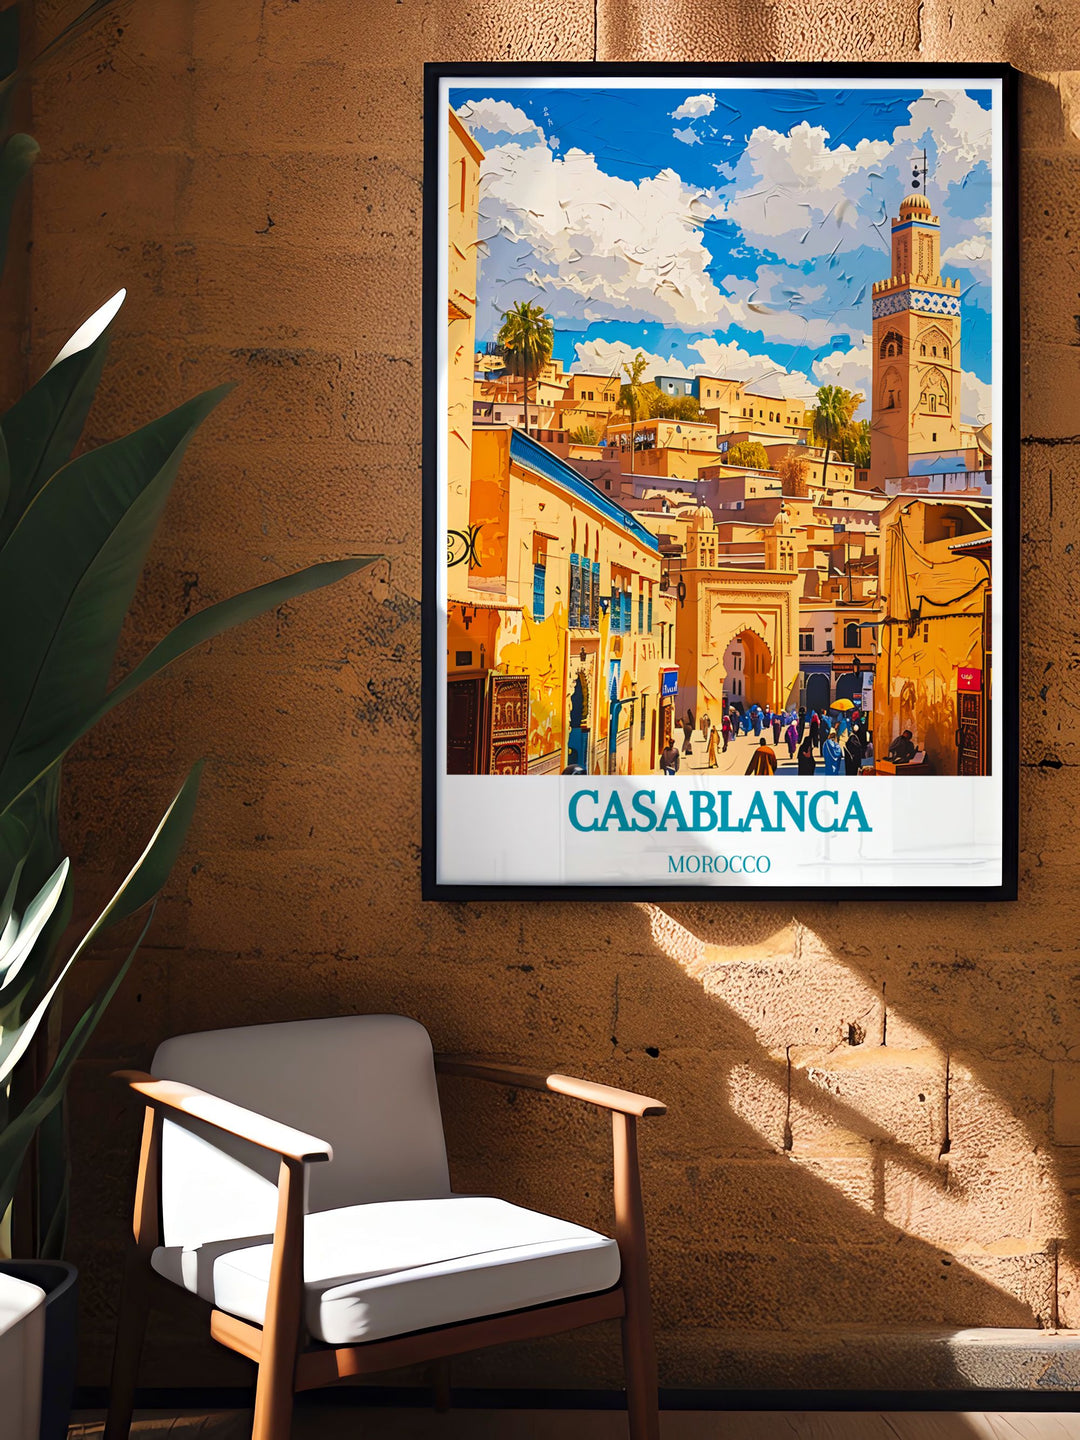 The captivating blend of traditional architecture and lively urban scenes in Casablanca and Old Medina is beautifully illustrated in this poster, making it a stunning addition to any wall art collection celebrating Morocco.